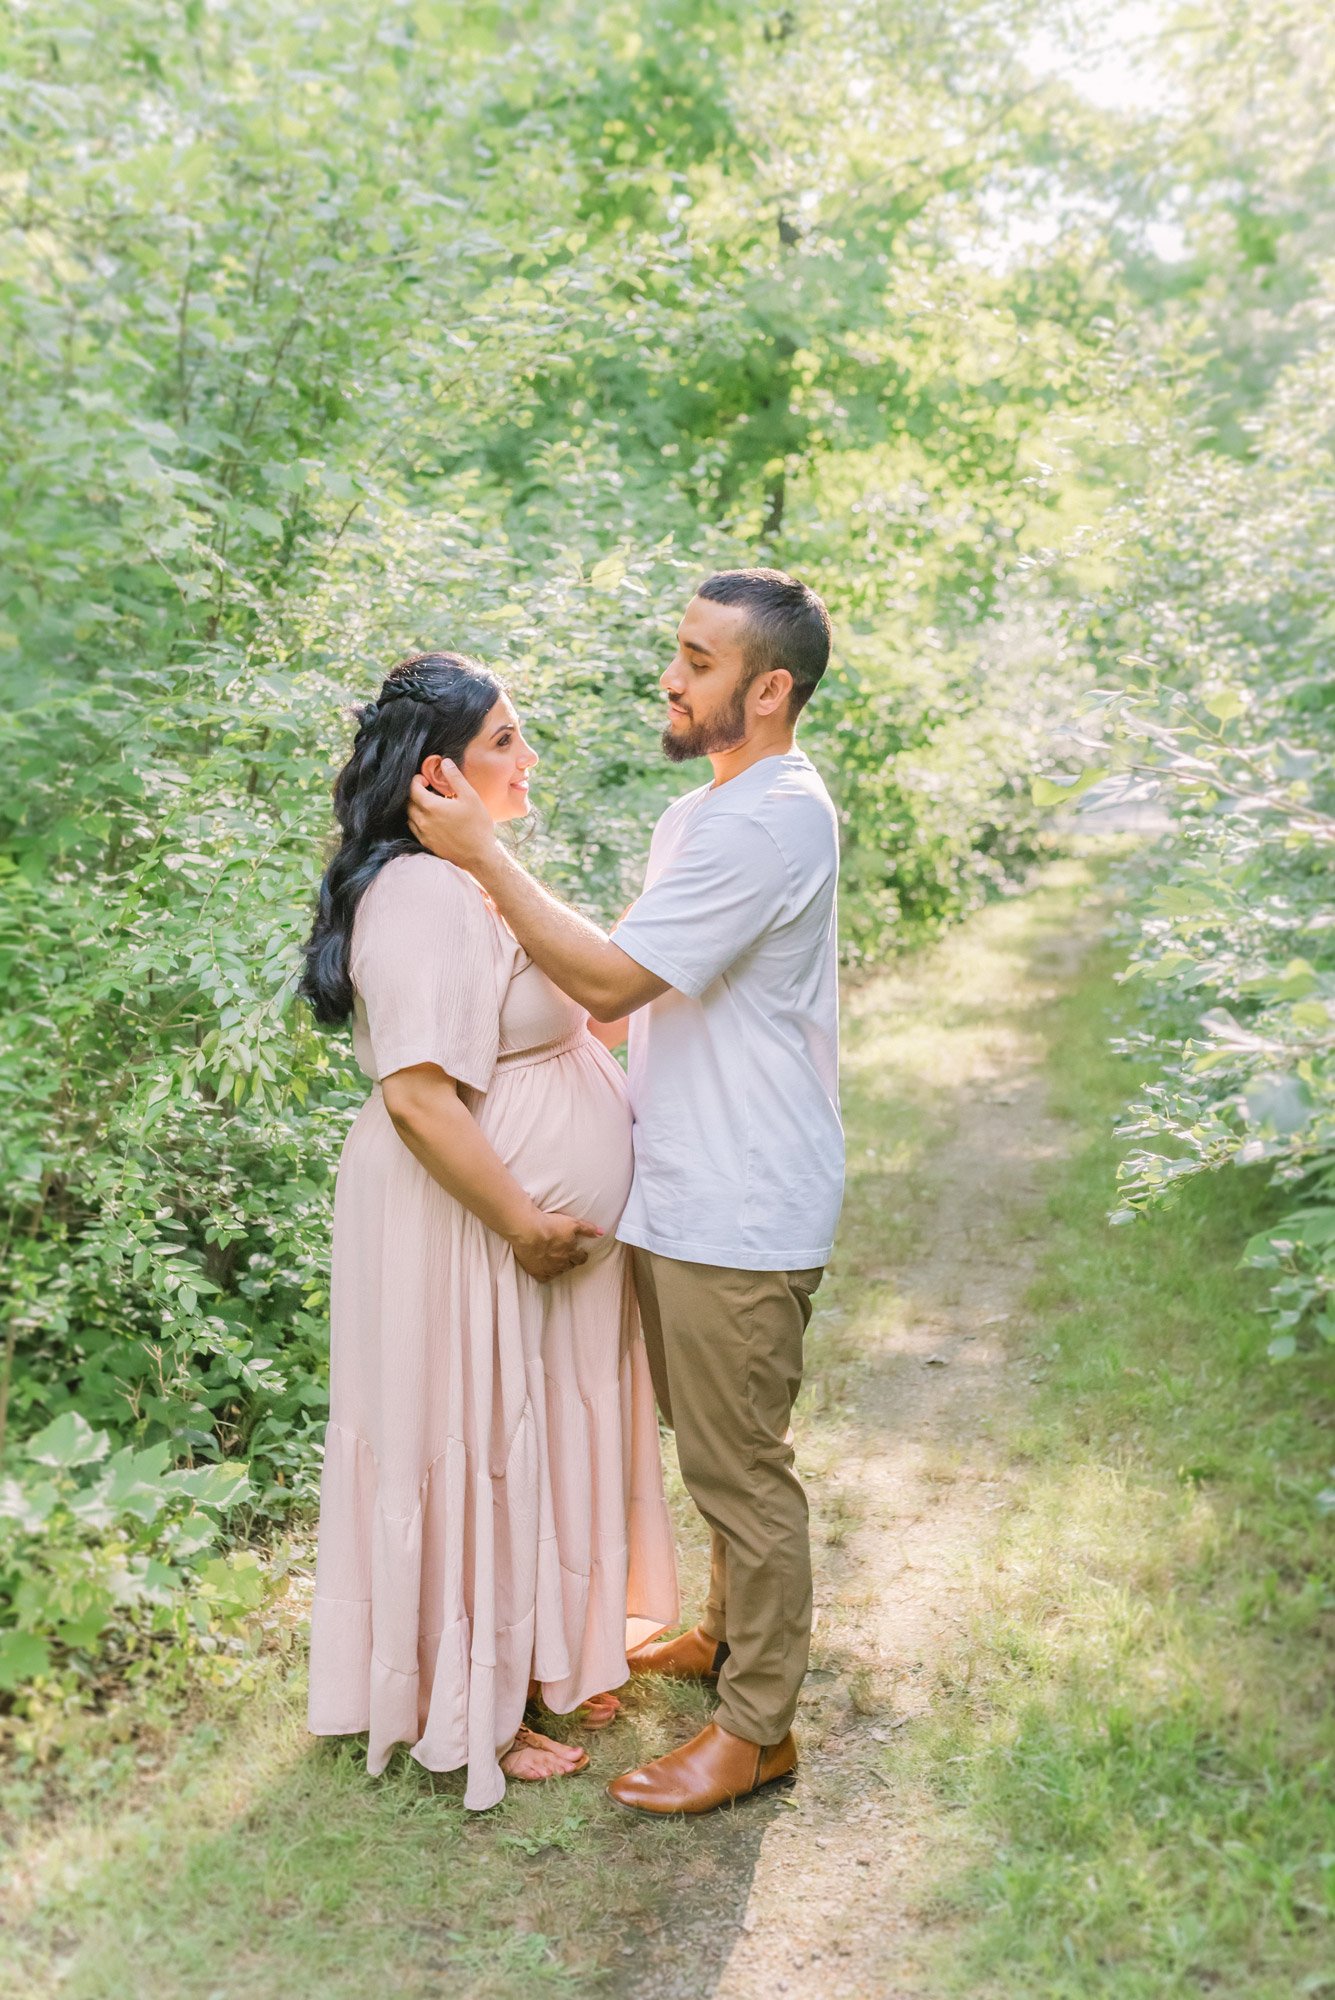 What Should Your Family Wear for Maternity Photos